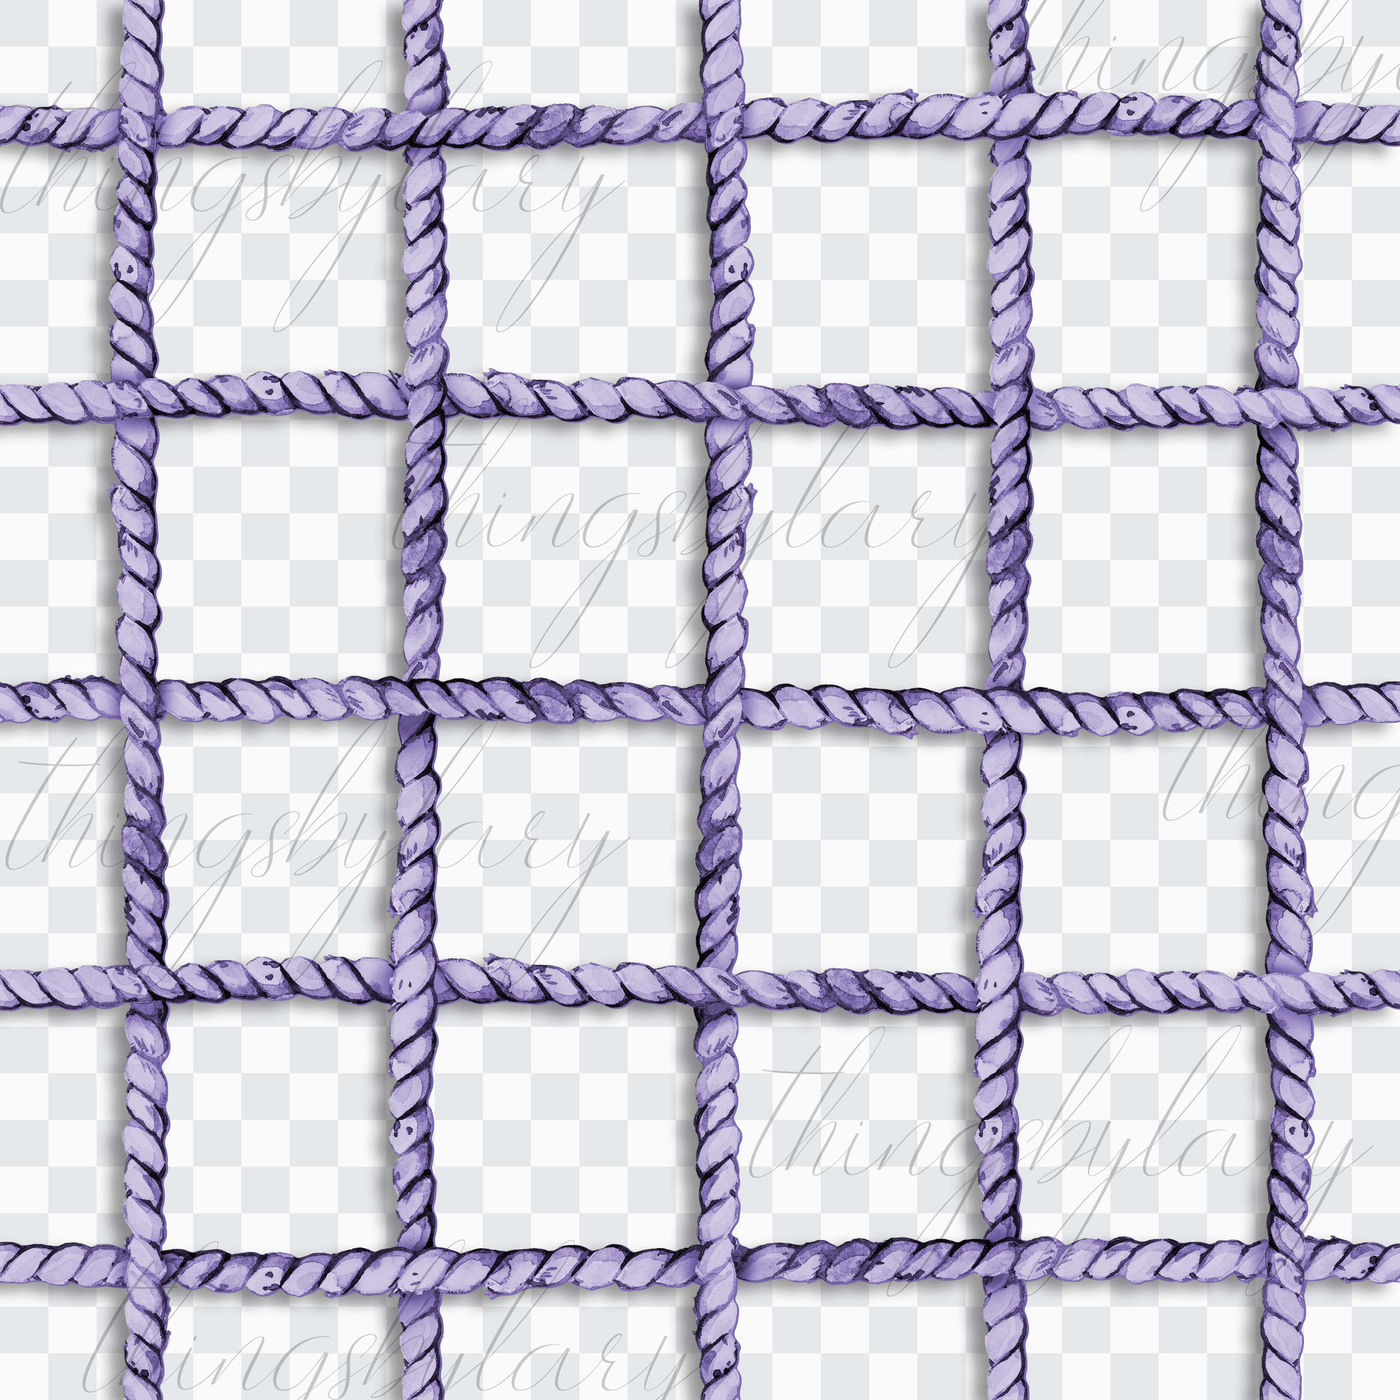 Rope Net Transparent Mesh Texture Background, Gear, Square, Transparent  Background Image And Wallpaper for Free Download